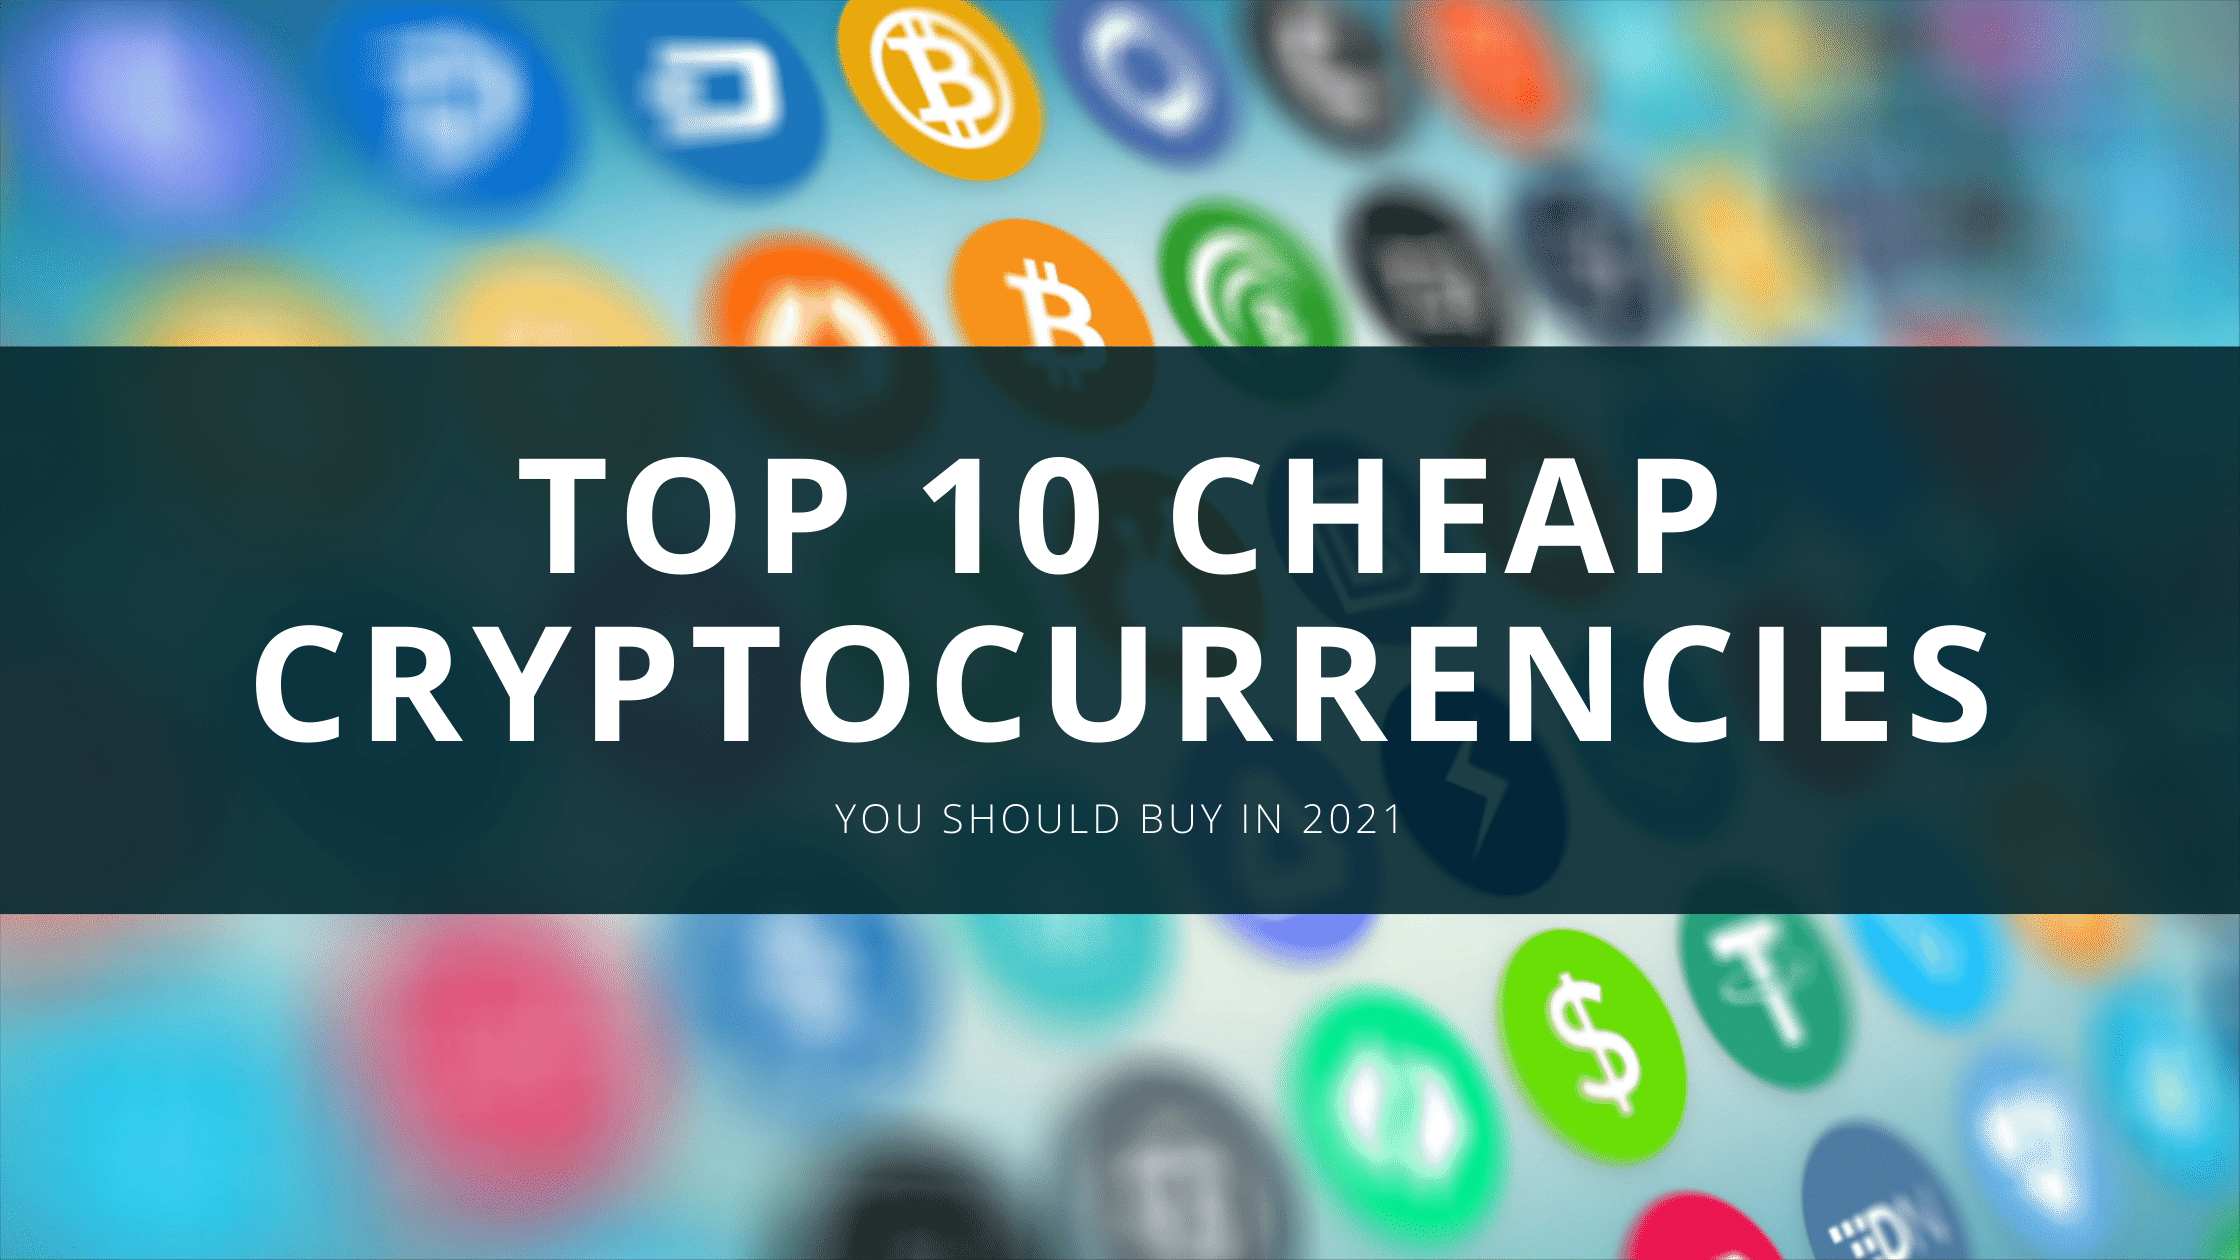 Top cryptocurrency under a penny okcupid bitcoin